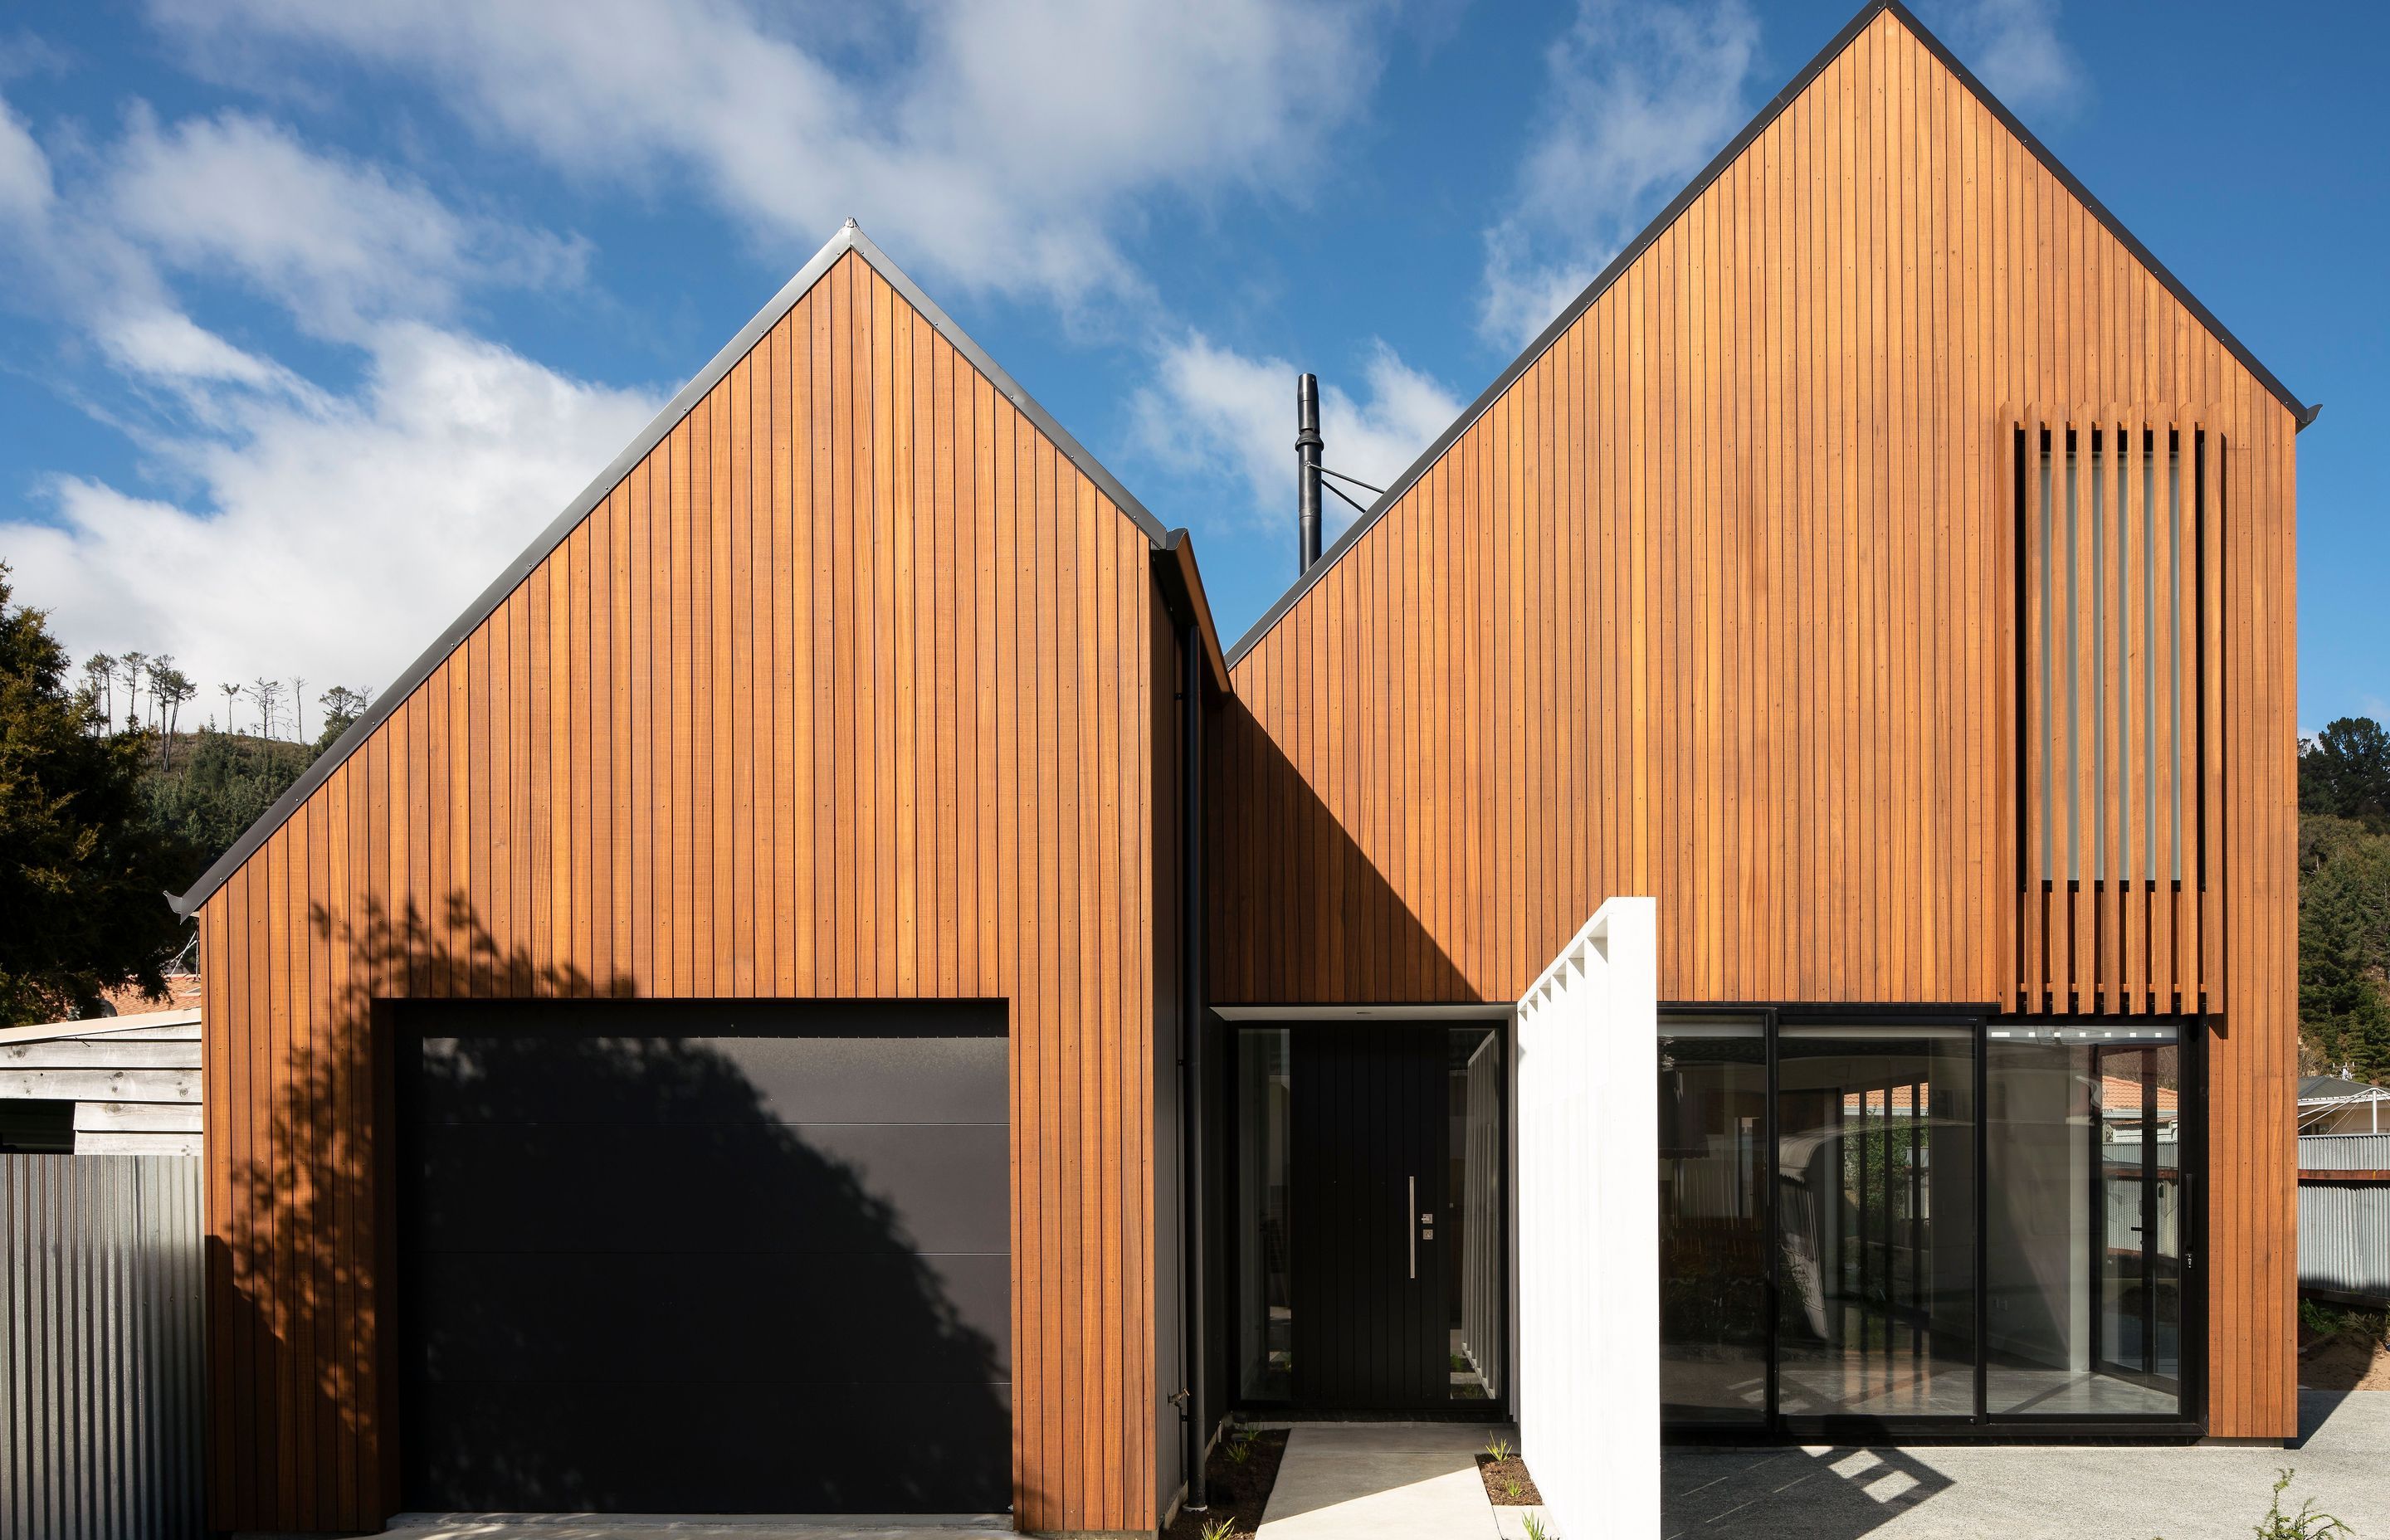 Truwood's striking colour and sleek profile make it ideal for architectural builds.